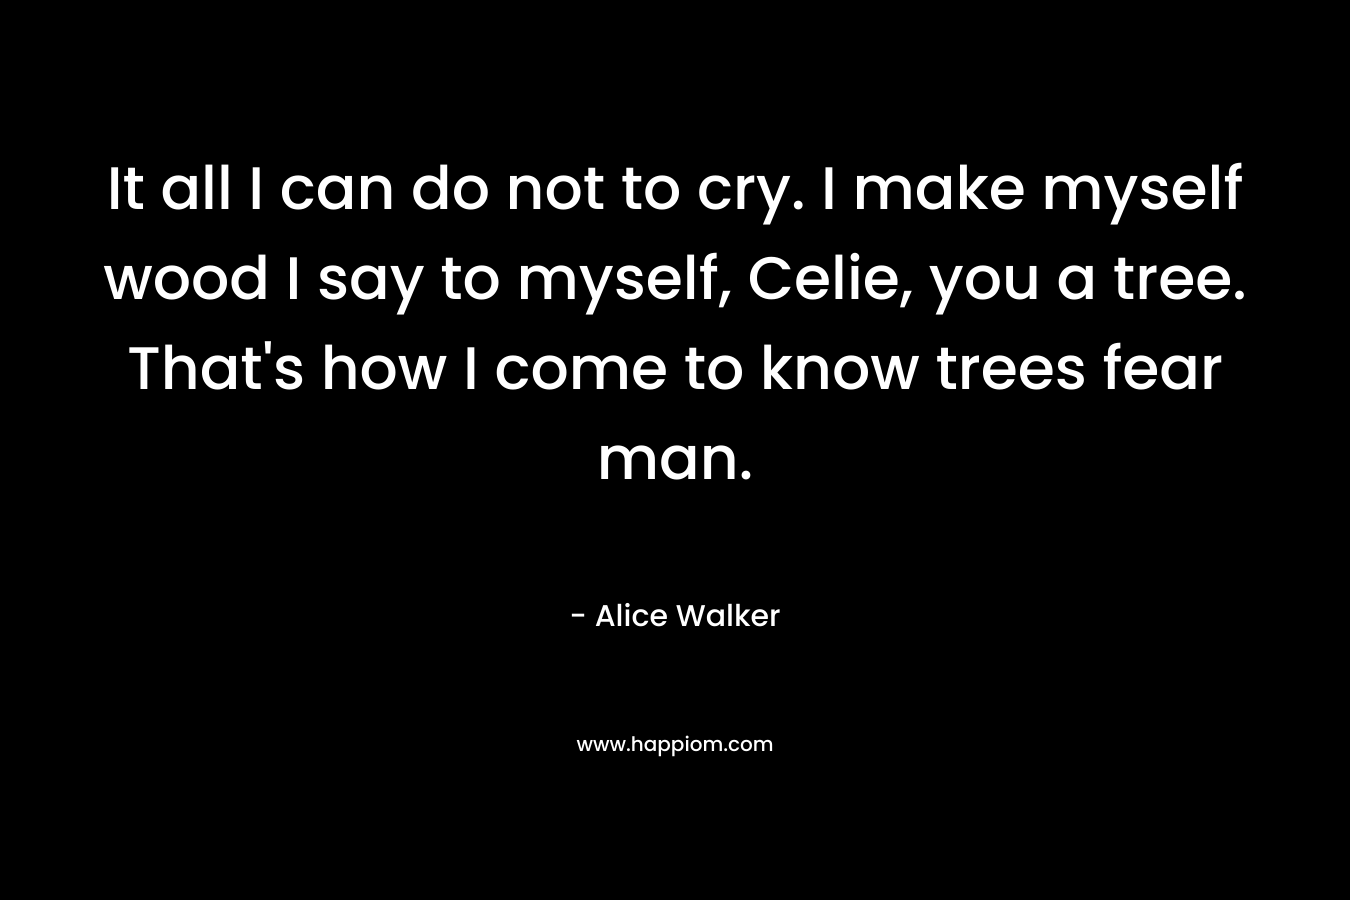 It all I can do not to cry. I make myself wood I say to myself, Celie, you a tree. That's how I come to know trees fear man.